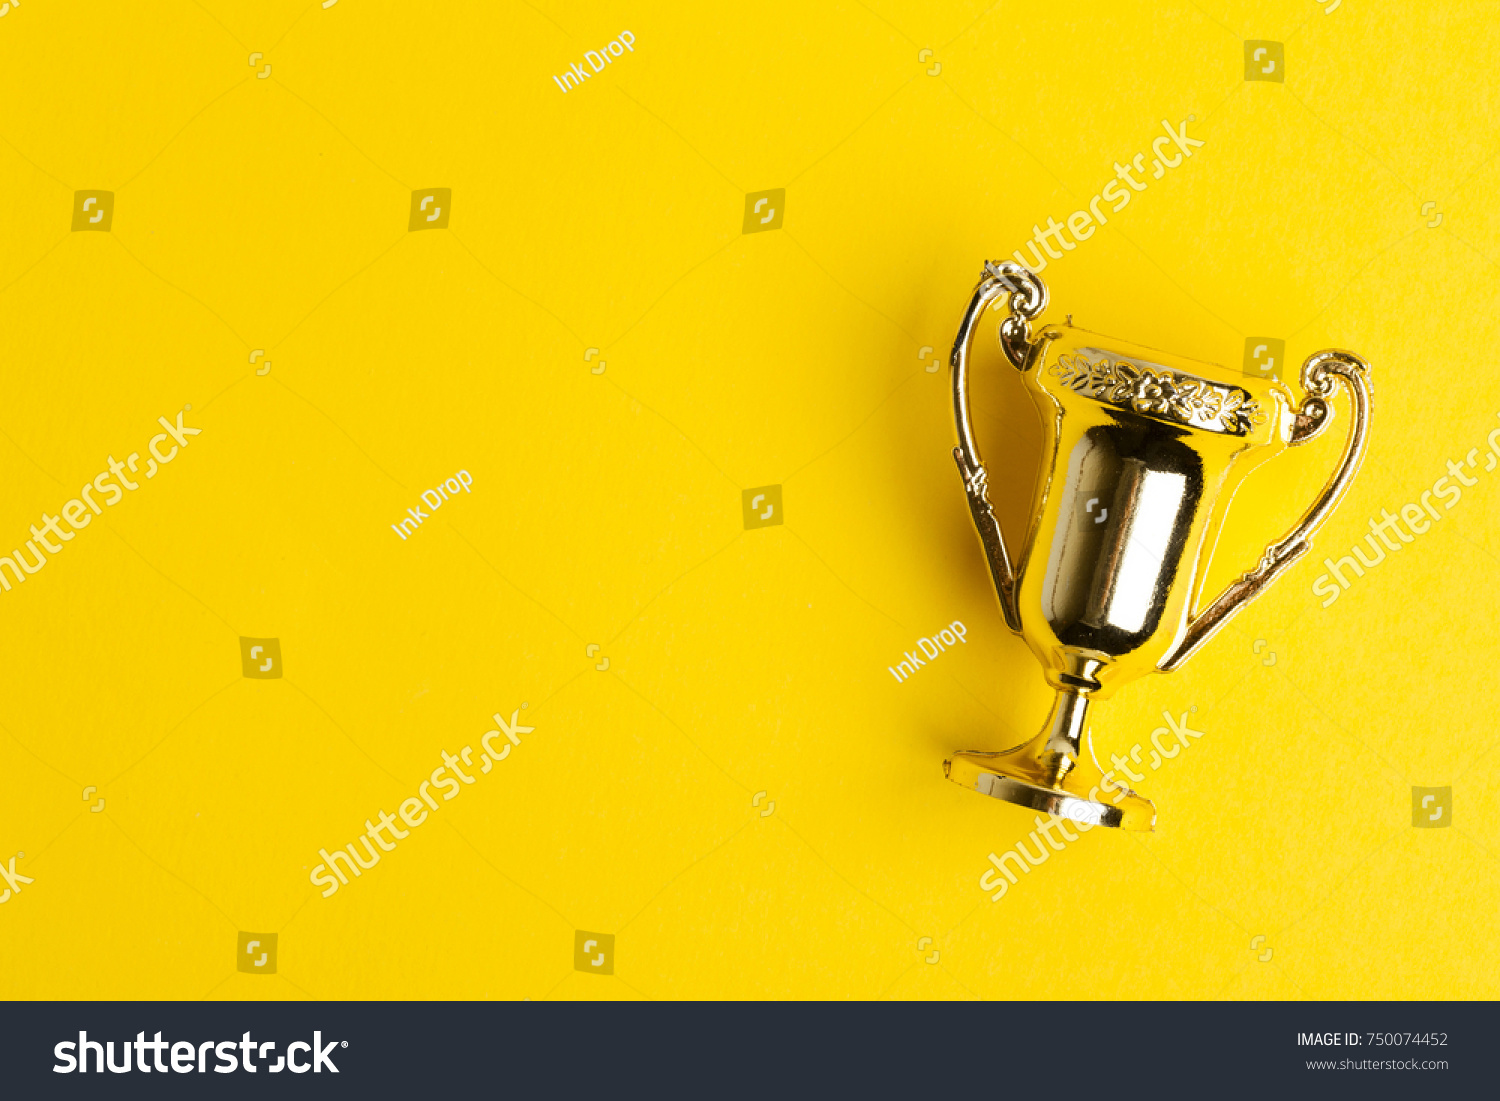 Gold winners achievement trophy on a yellow background #750074452